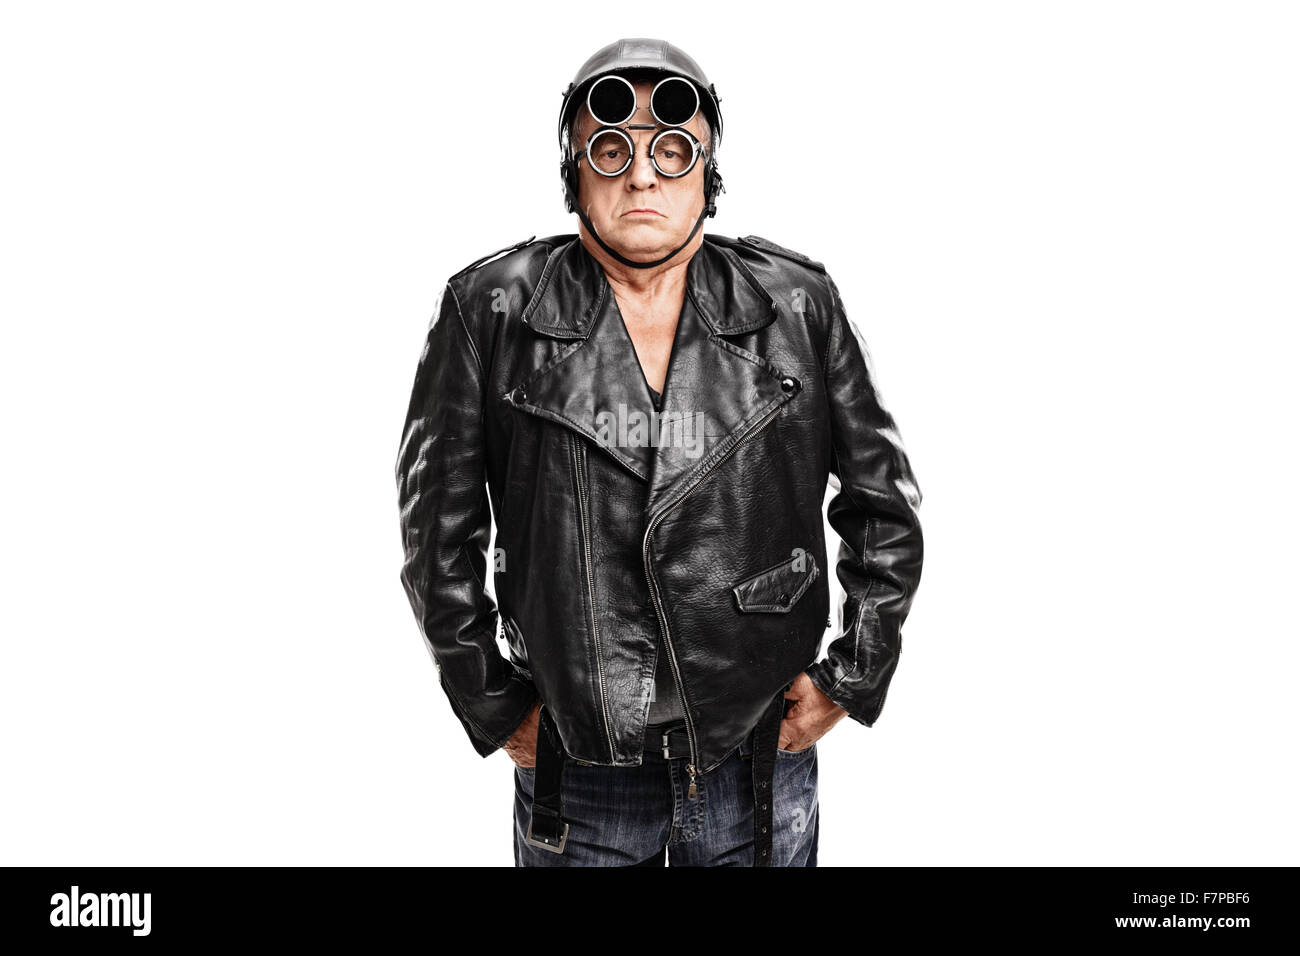 Grumpy mature motorcyclist posing in a black leather jacket with a helmet and goggles isolated on white background Stock Photo